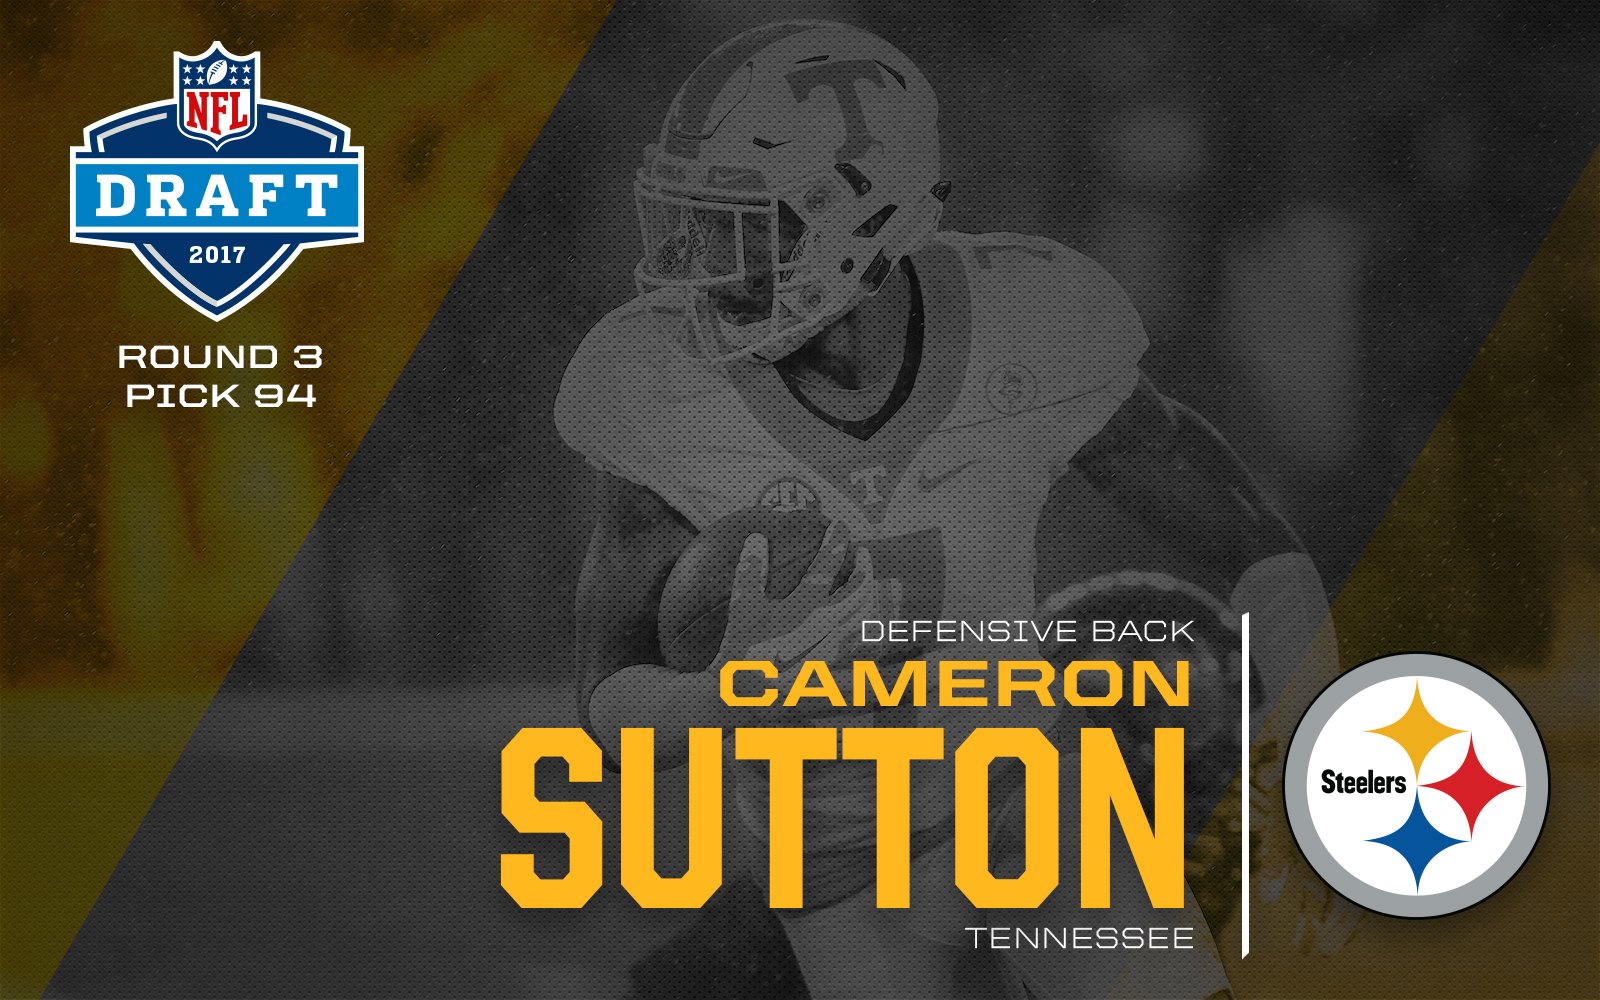 Steelers select Cam Sutton in 3rd Rd #94 overall in NFL Draft